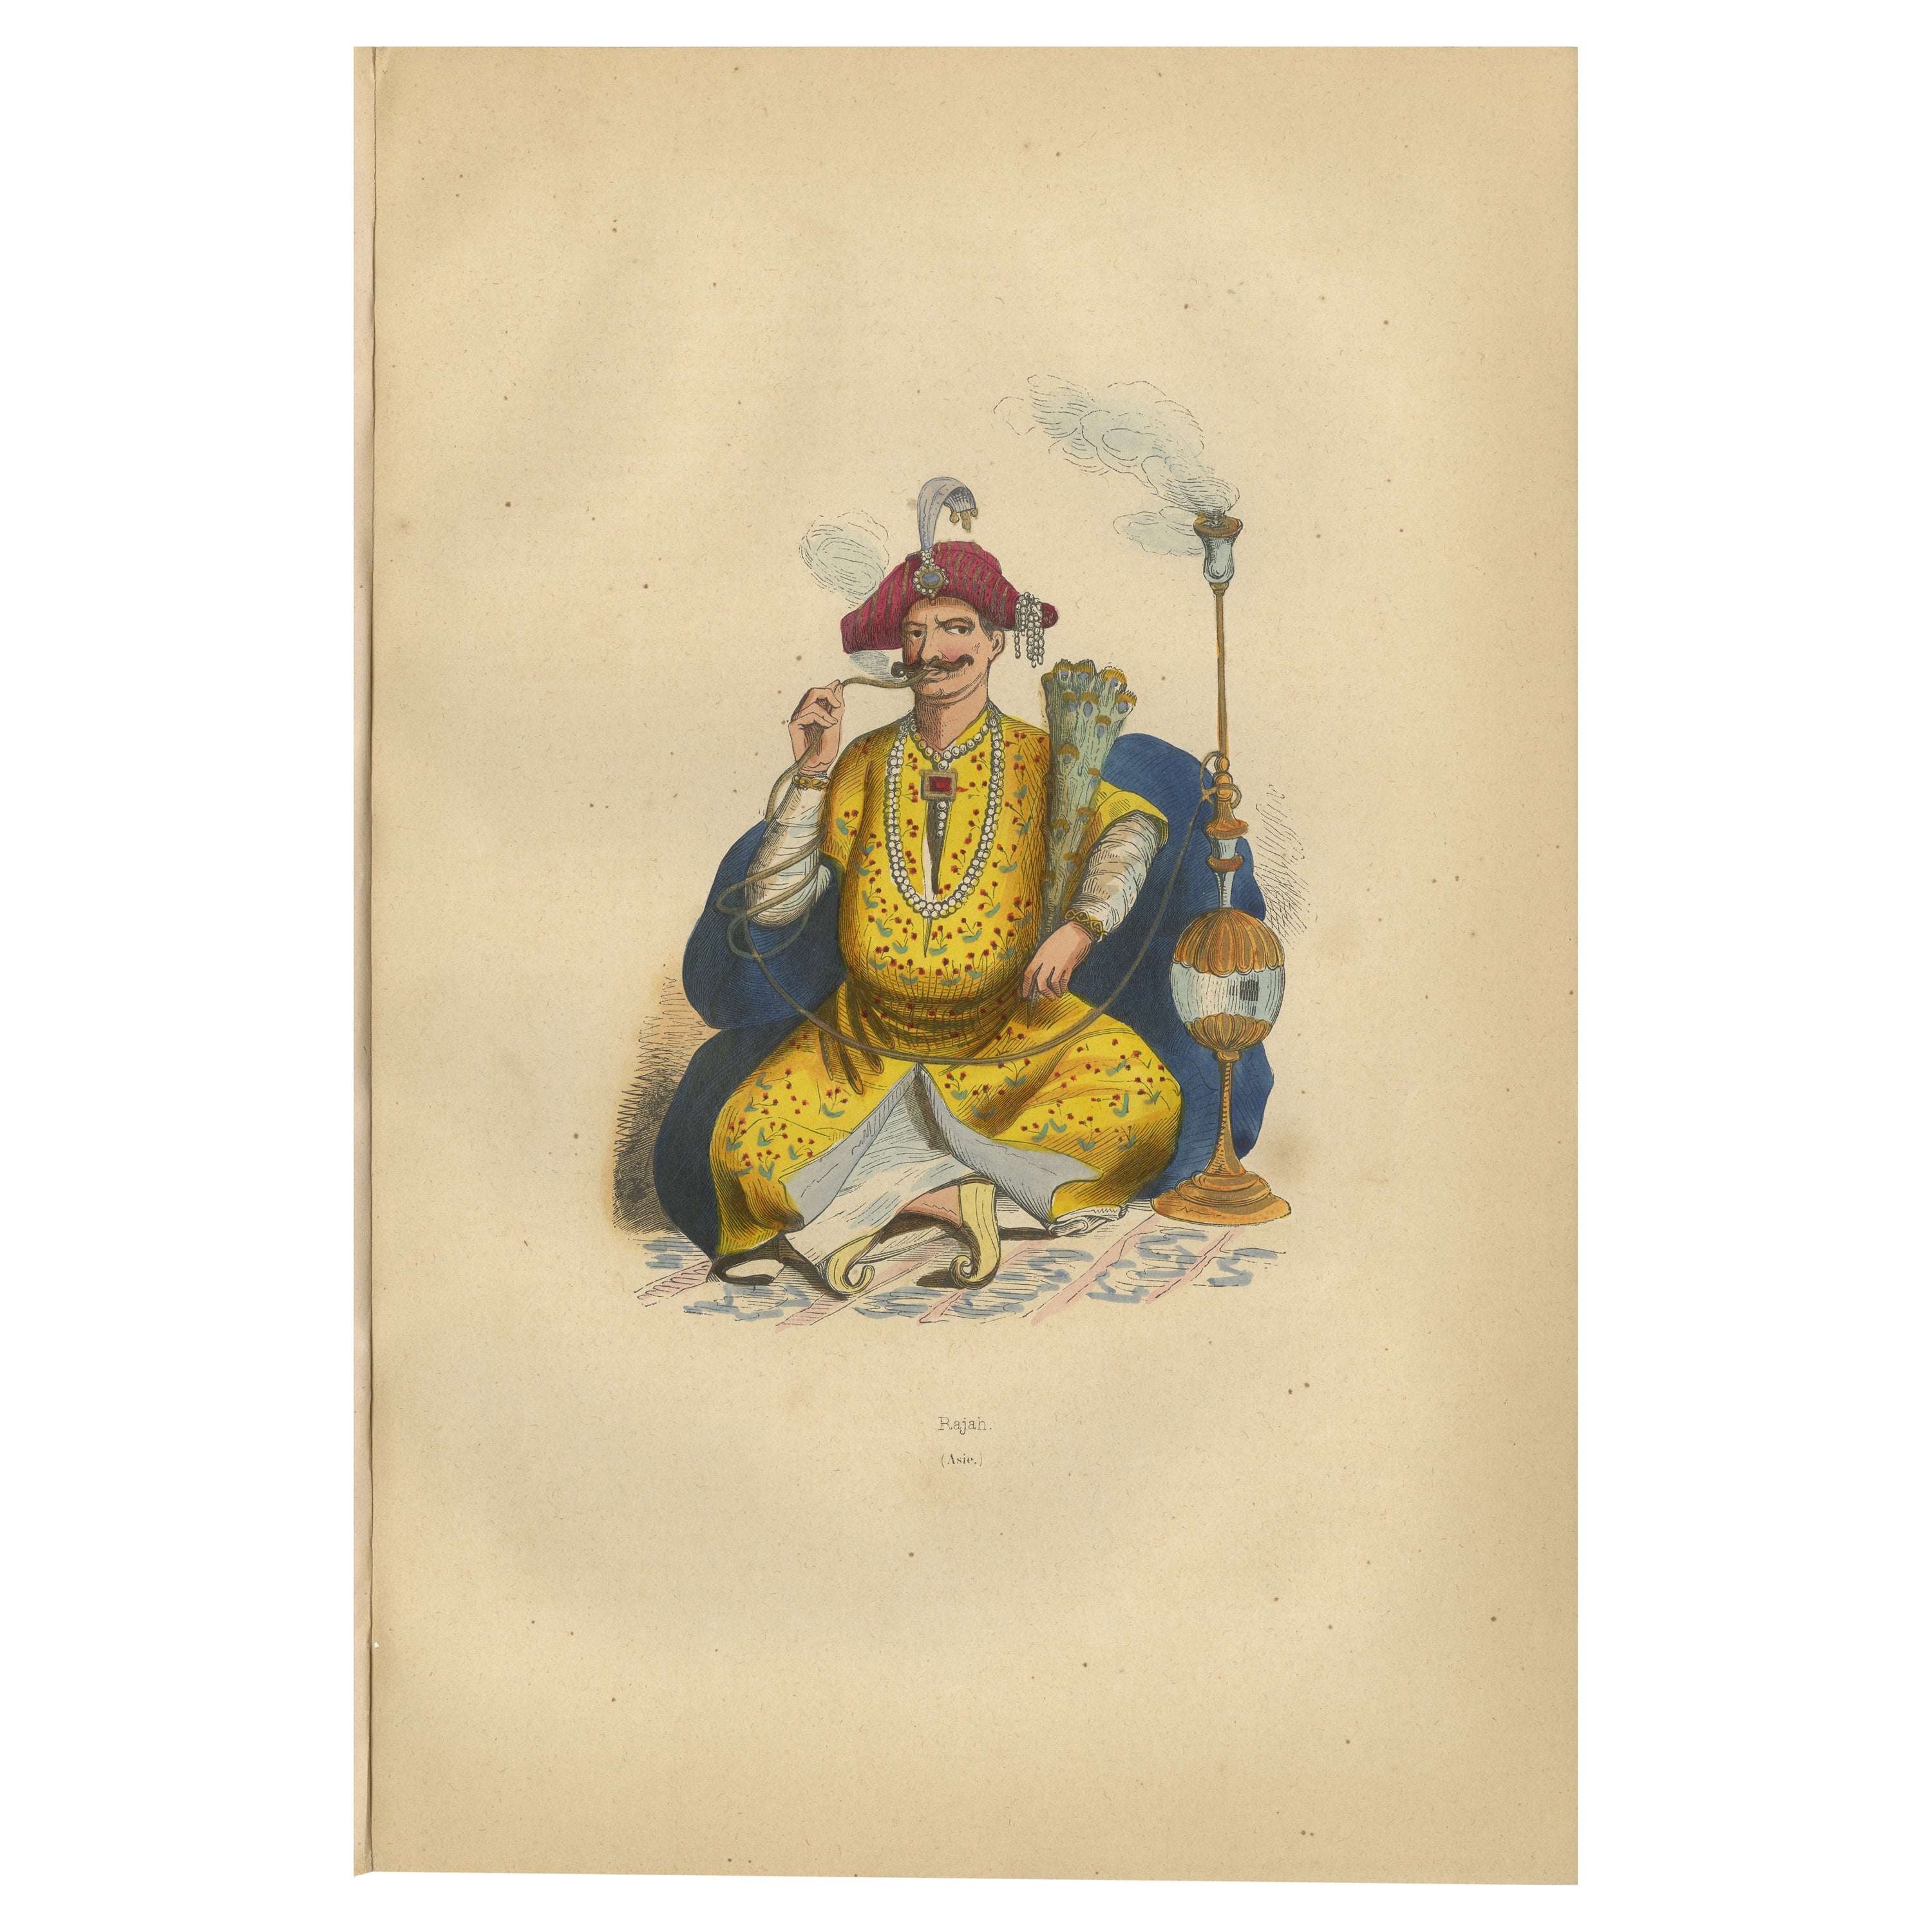 Antique Print of a Rajah by Wahlen '1843' For Sale